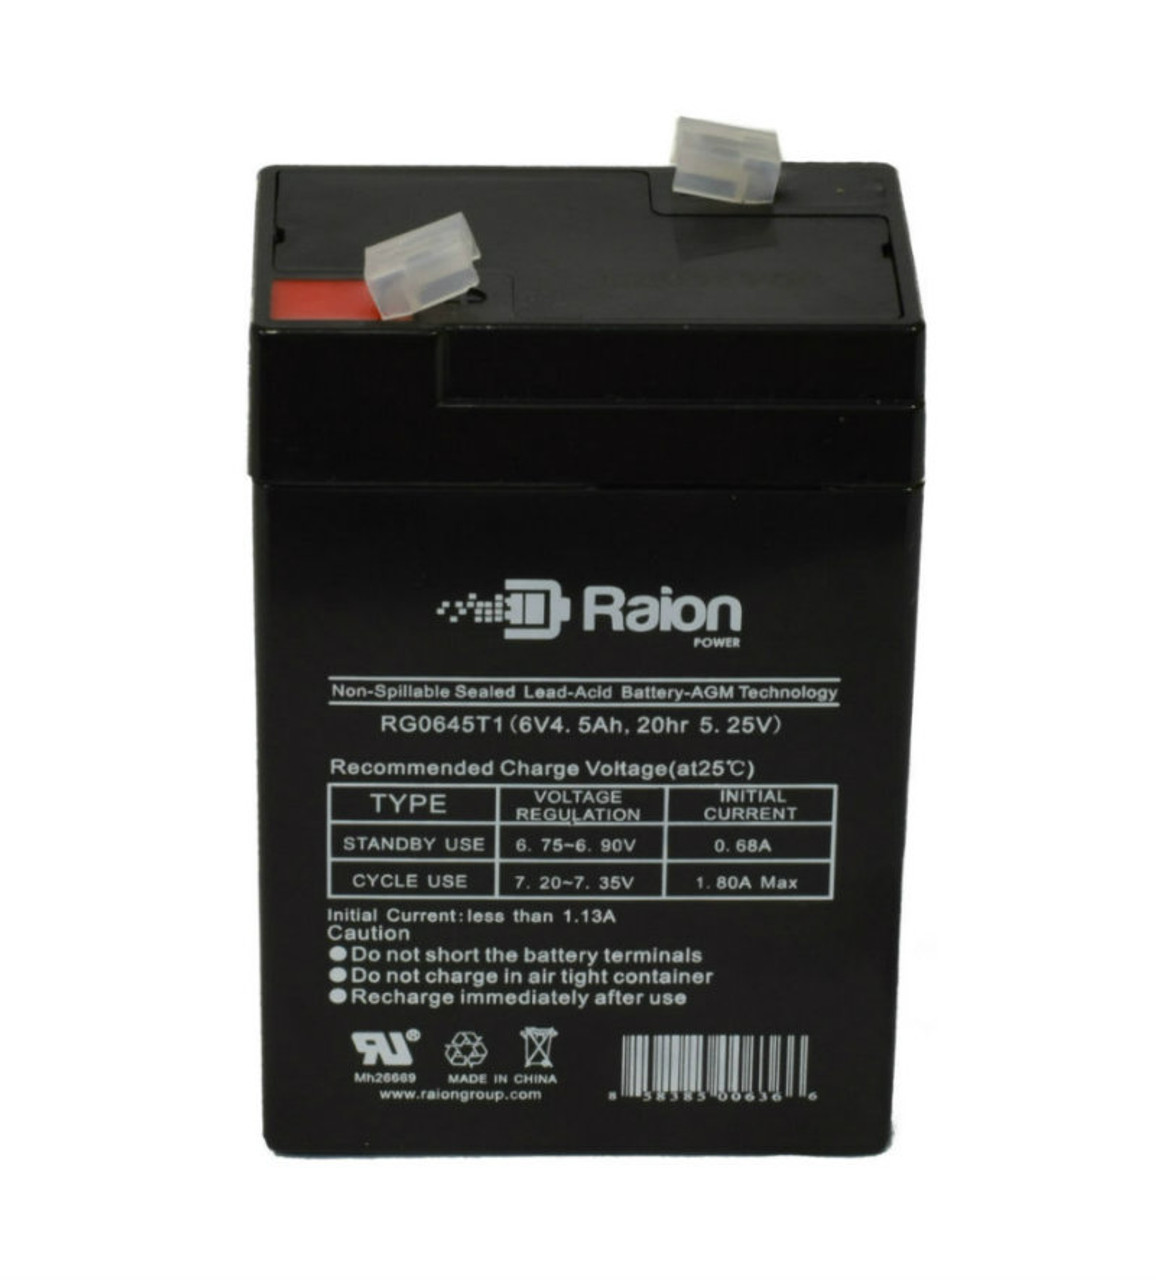 Raion Power RG0645T1 Replacement Battery Cartridge for Kid Trax KT1268WM Minnie Mouse Hot Rod Toddler Quad